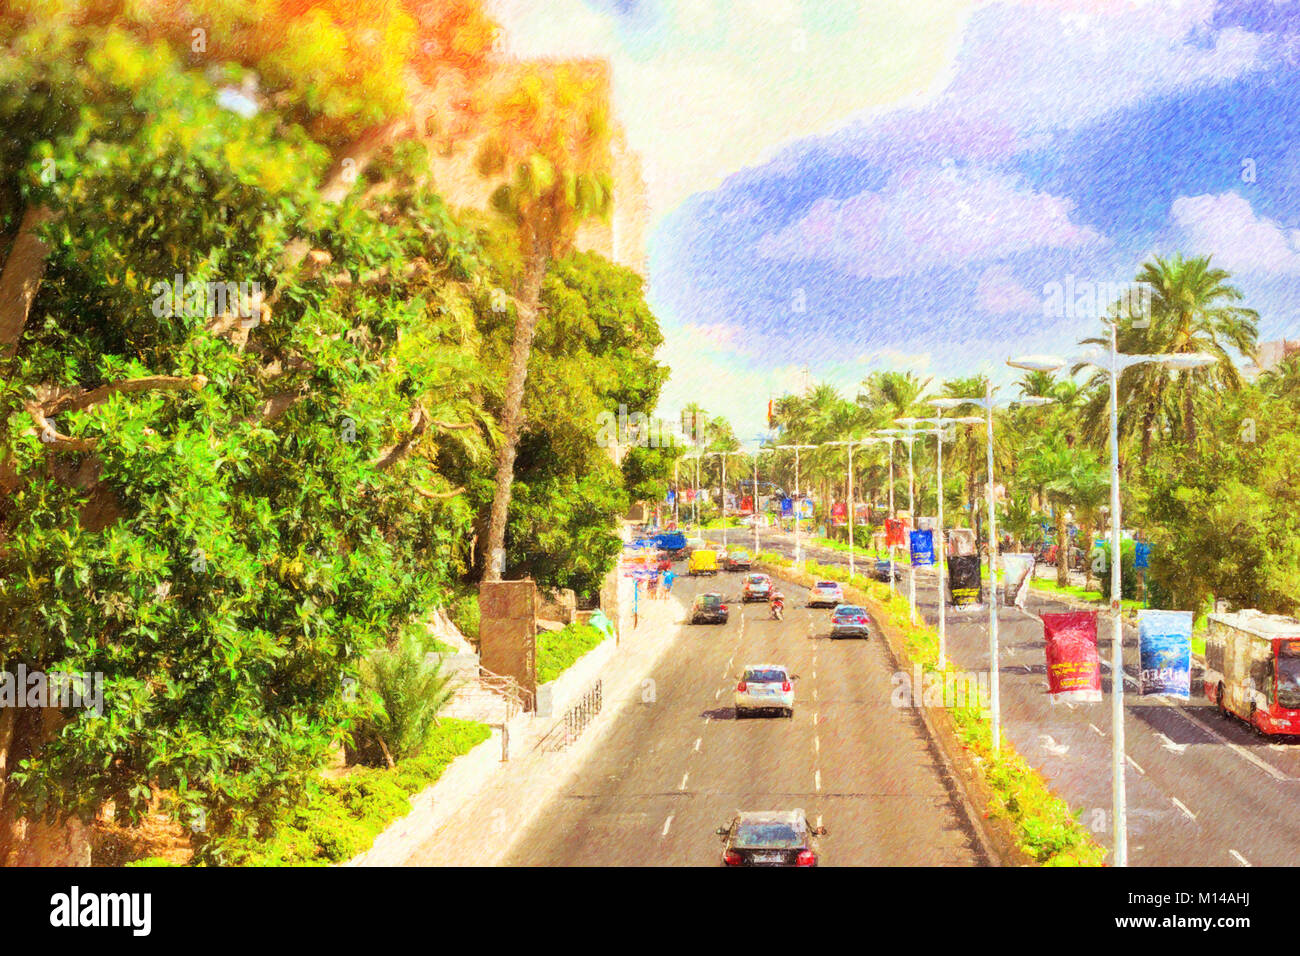 Spain, Alicante. Active vehicular traffic on busy highway. View of major highways Carrer de Jovellanos from bridge. Photo stylized illustration Stock Photo